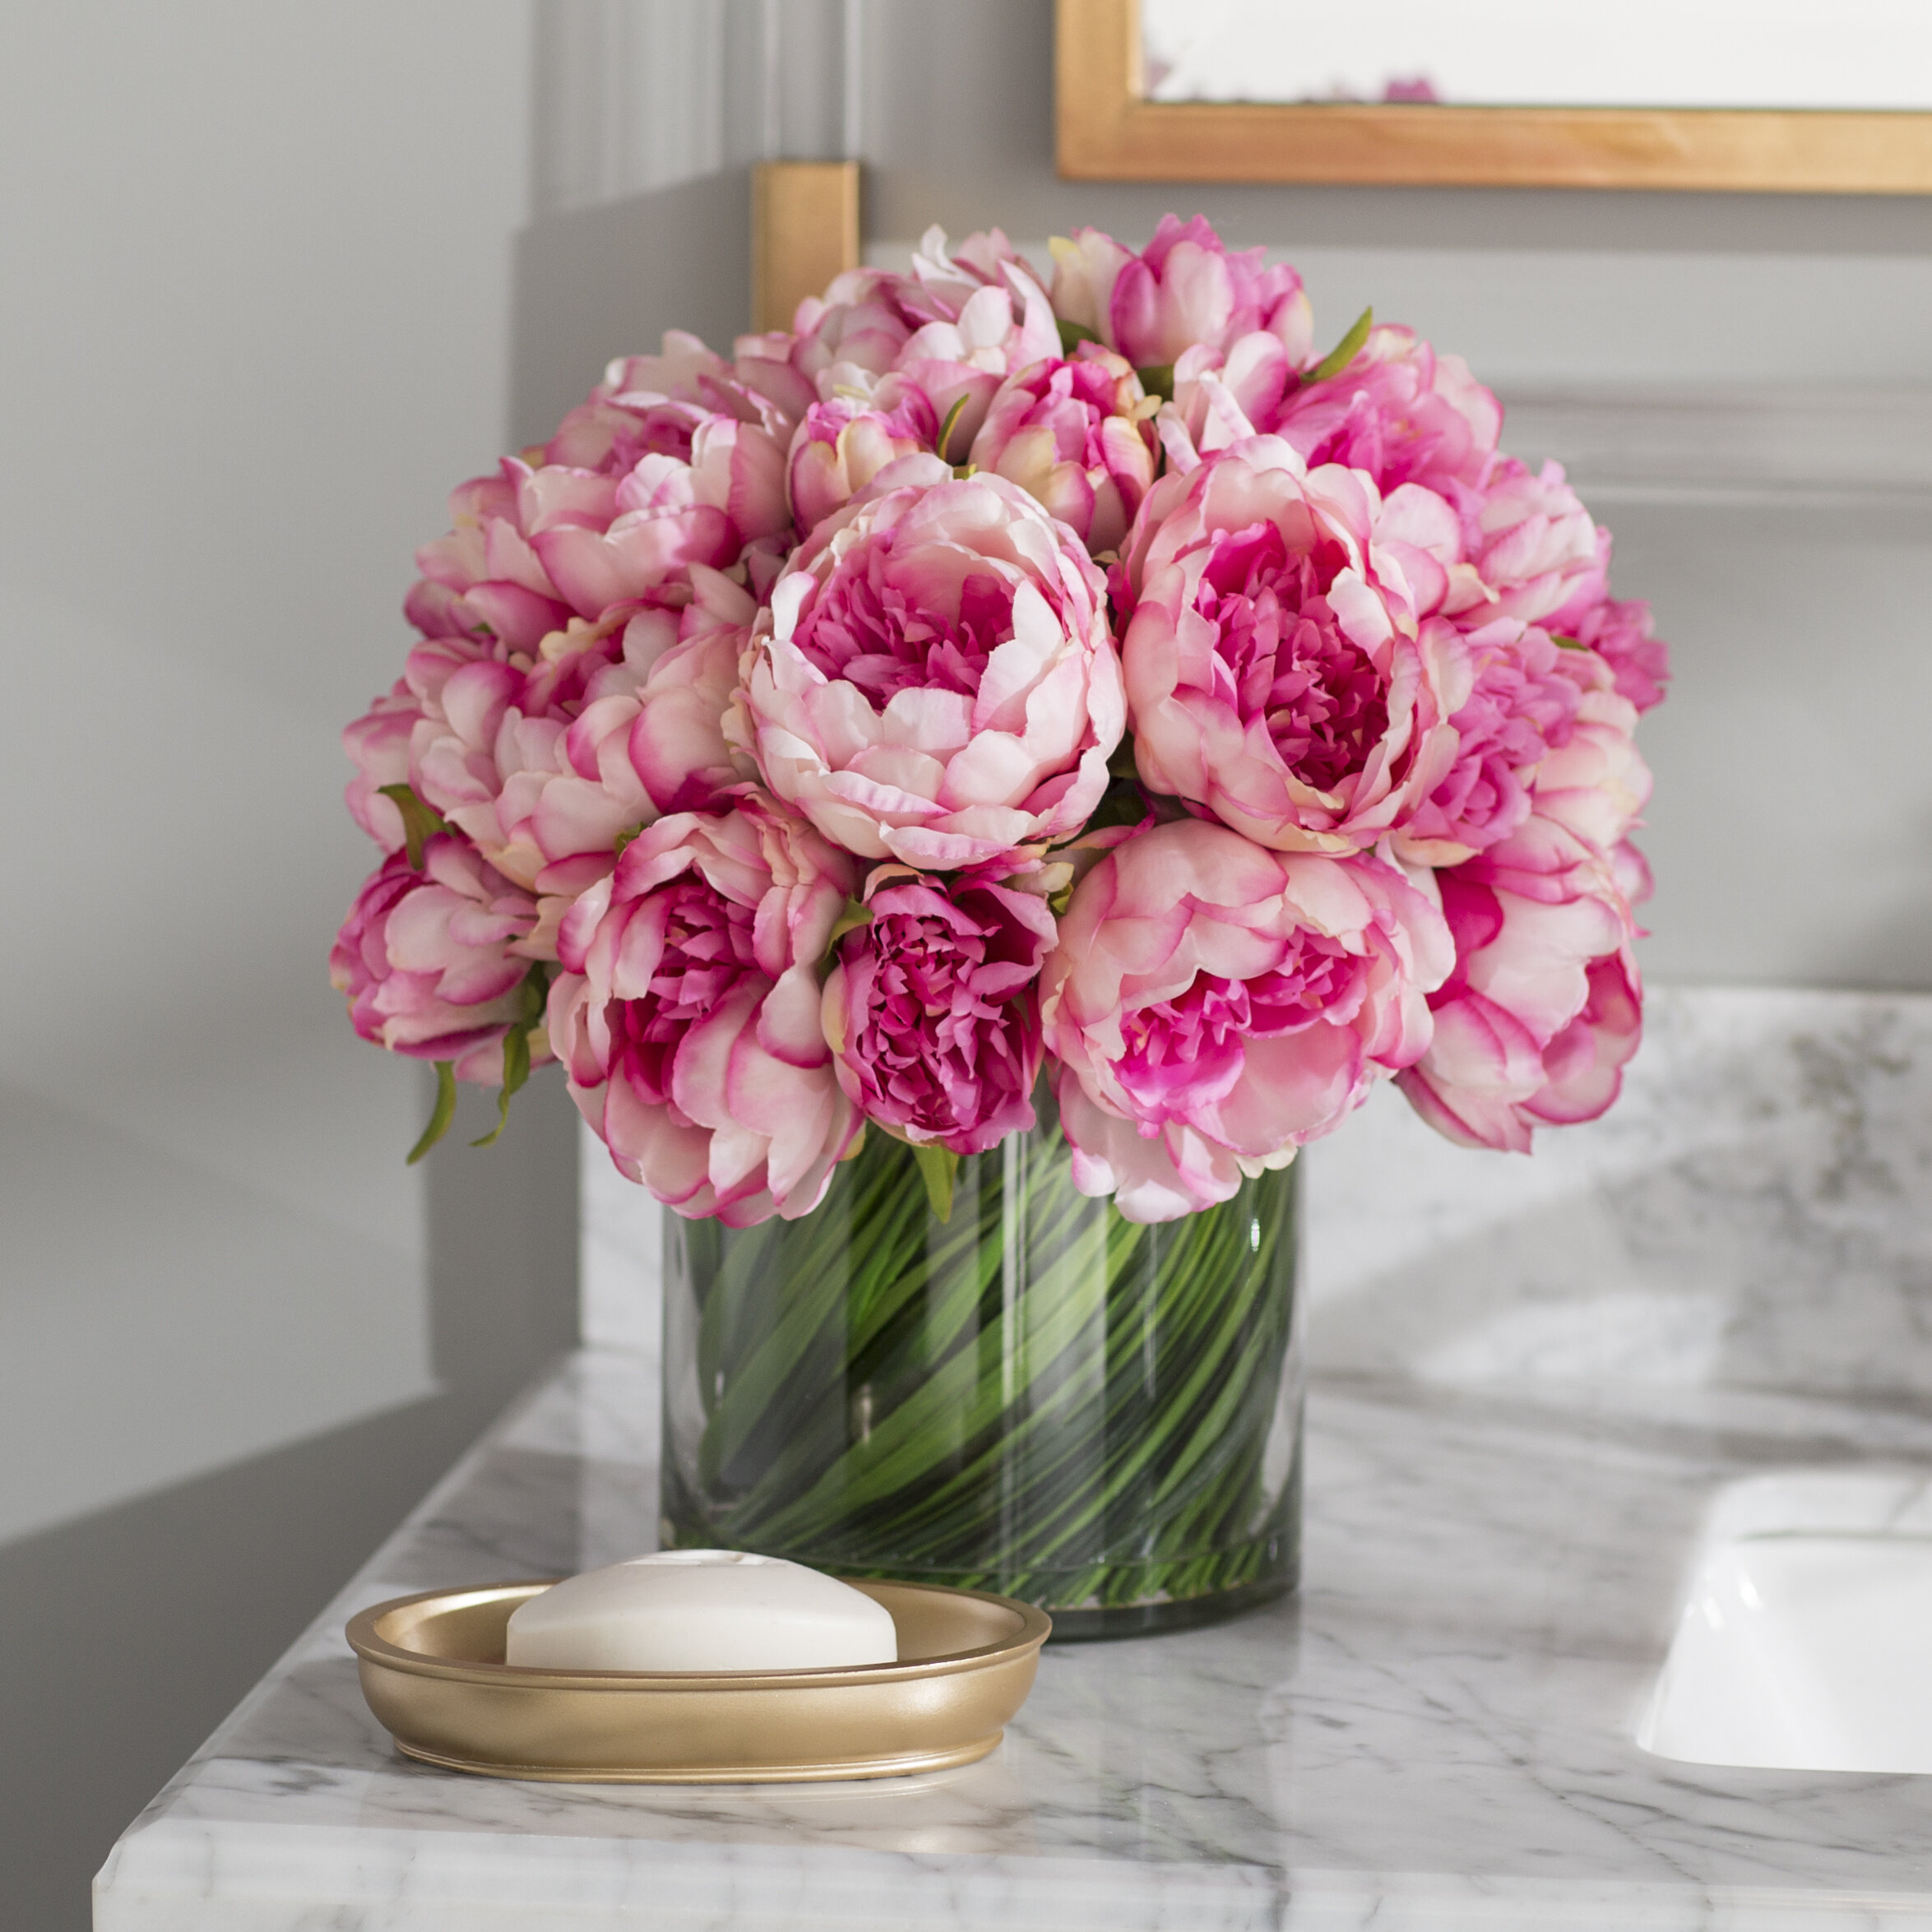 Featured image of post Floral Centerpieces For Coffee Table - Find the best fresh flower centerpieces for your next occasion, whether you&#039;re looking for large centerpieces for a wedding or small centerpieces for a backyard party.